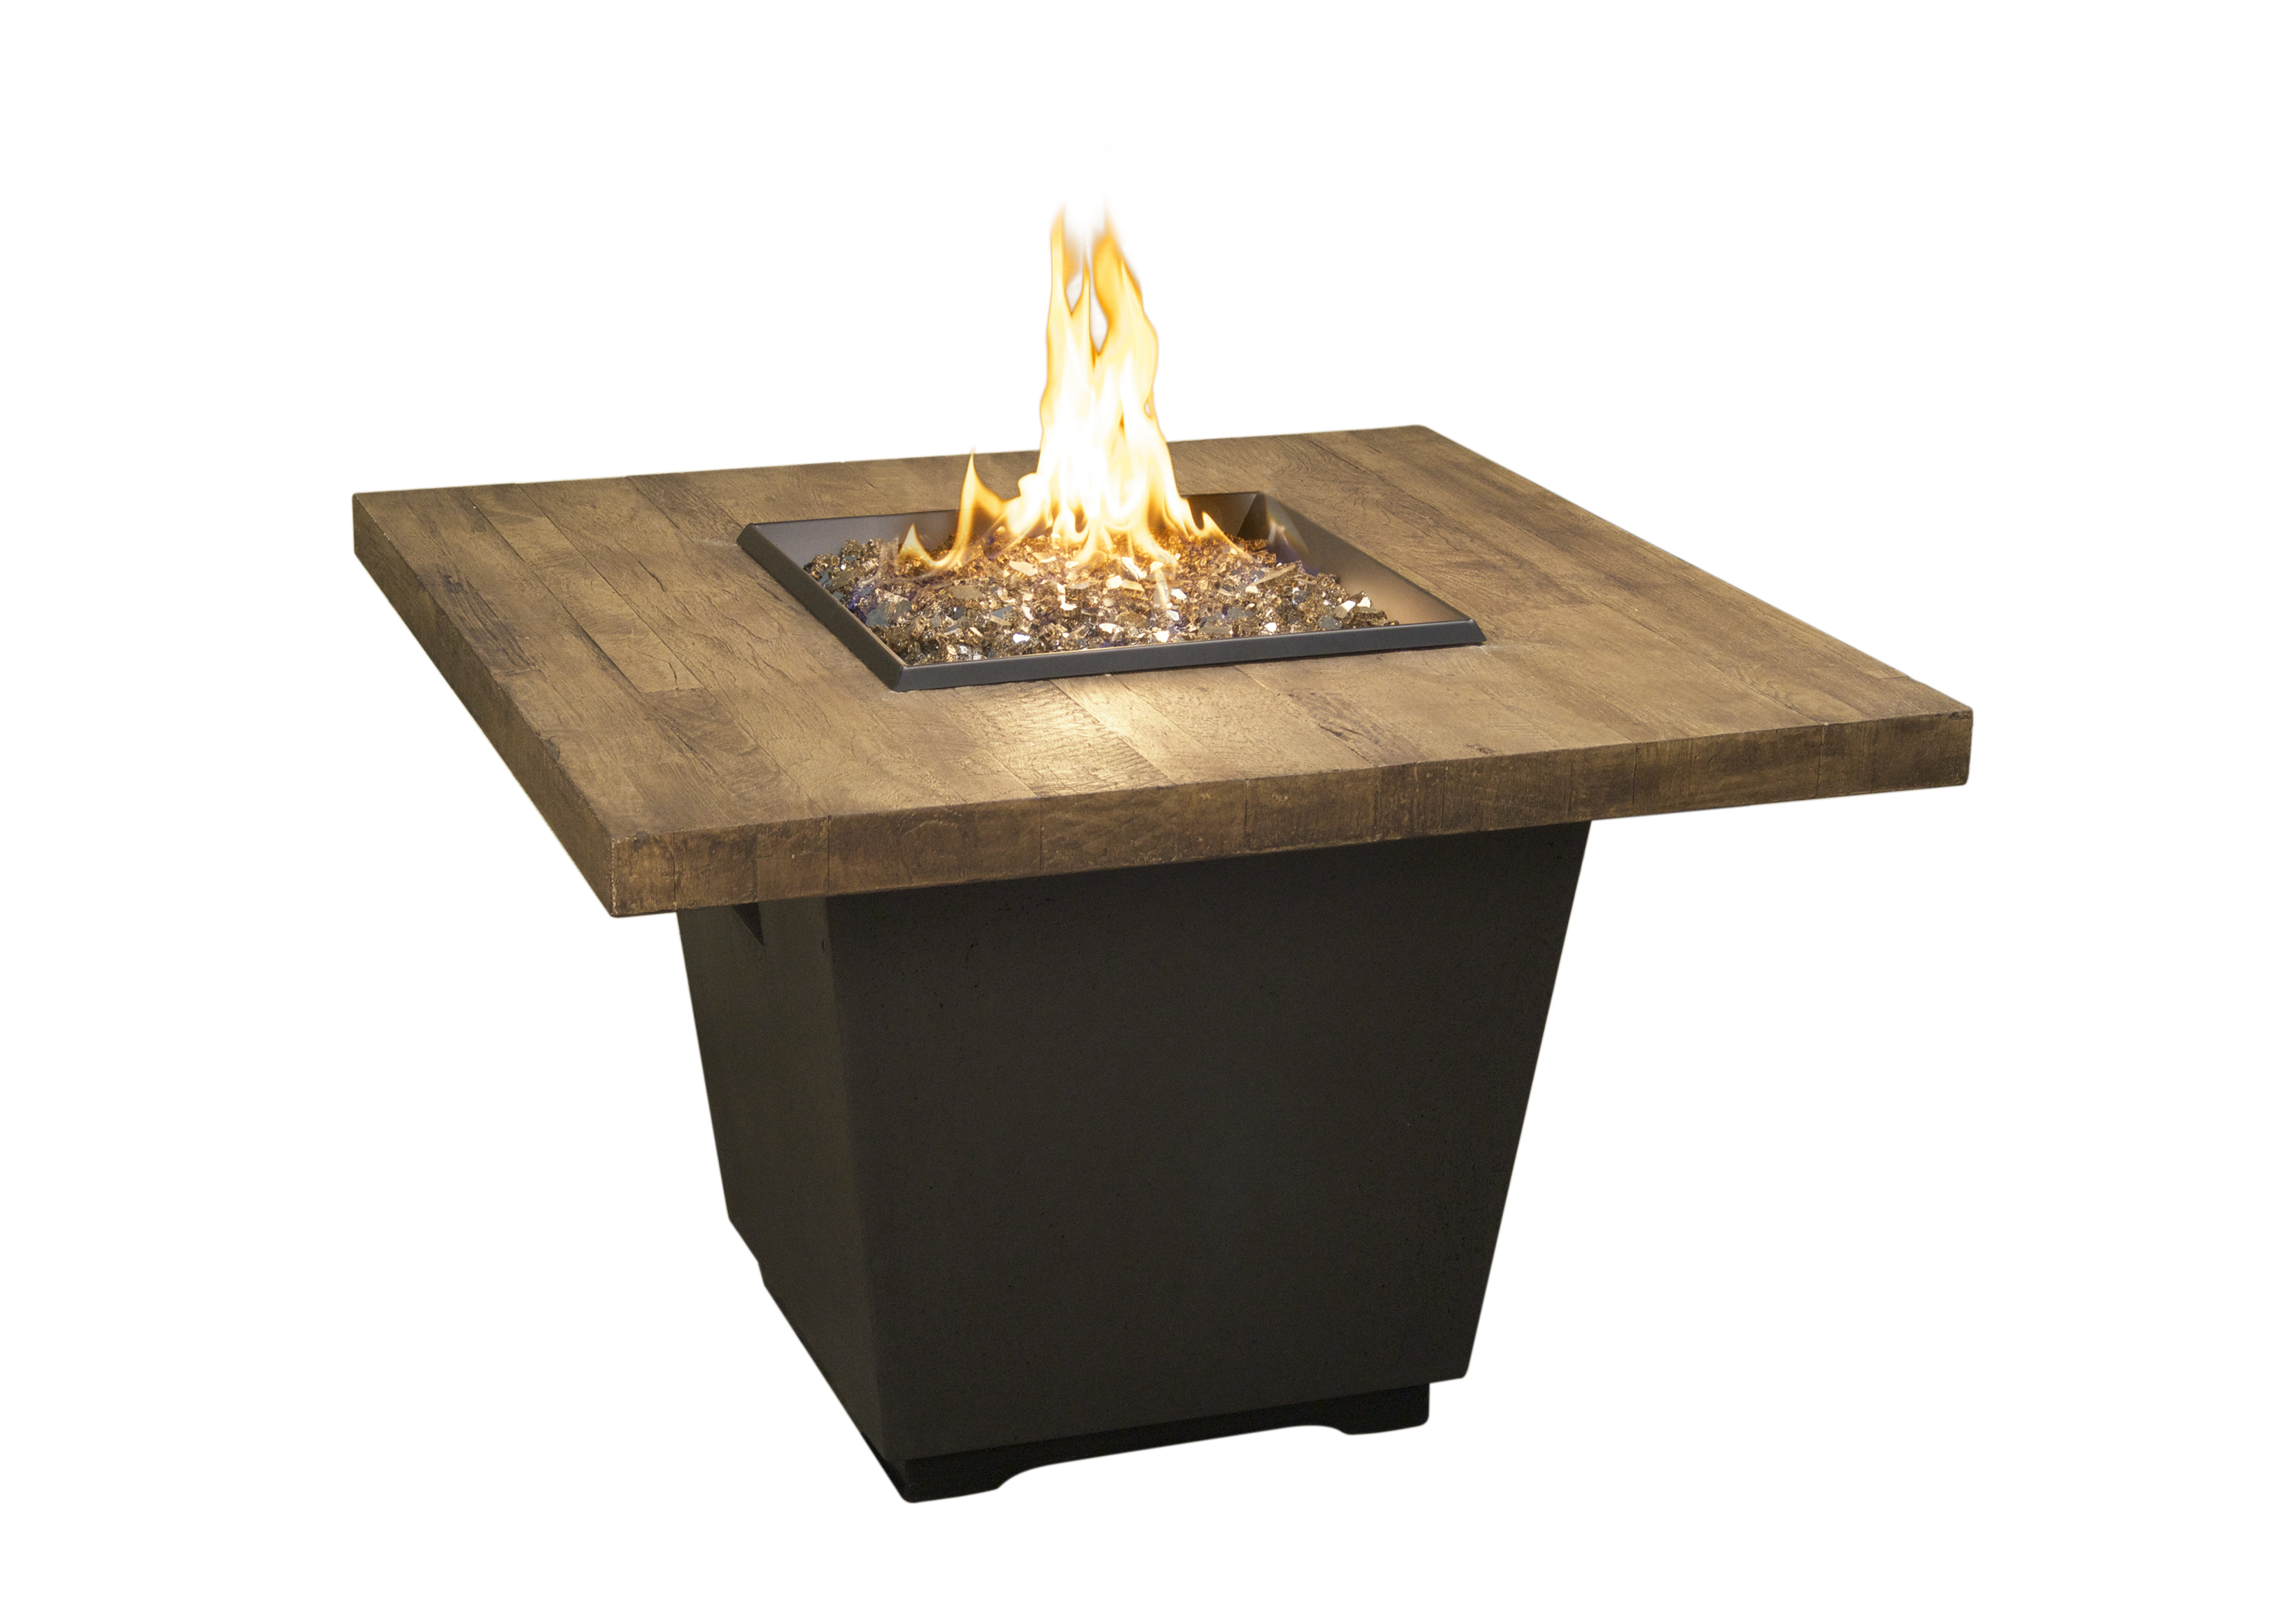 AFD 640 FO Reclaimed Wood Cosmo Square Firetable French Barrel Oak Top